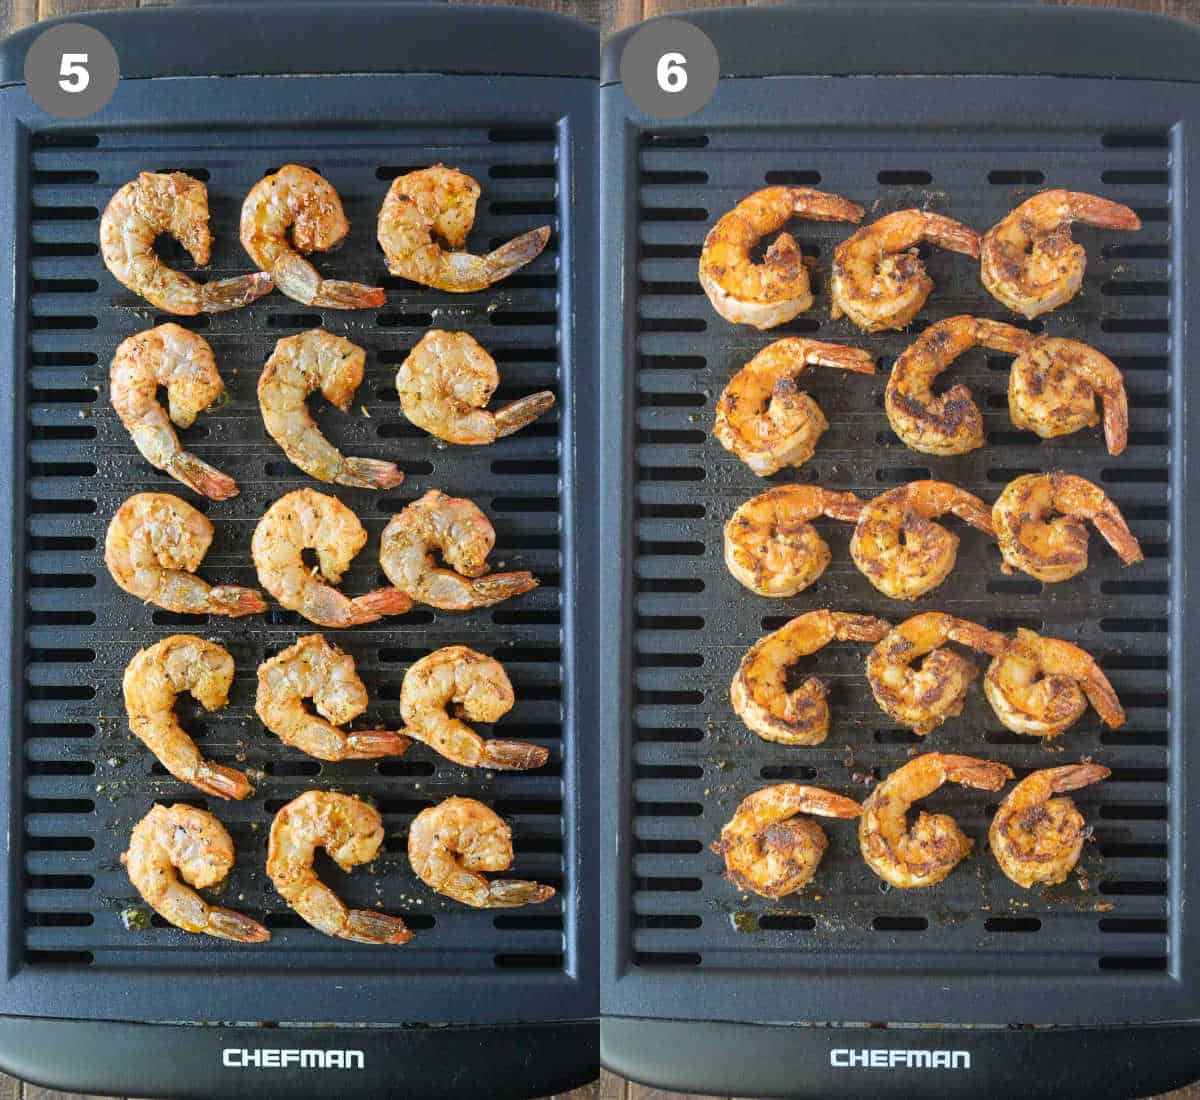 Seasoned shrimp placed on a grill and cooked.